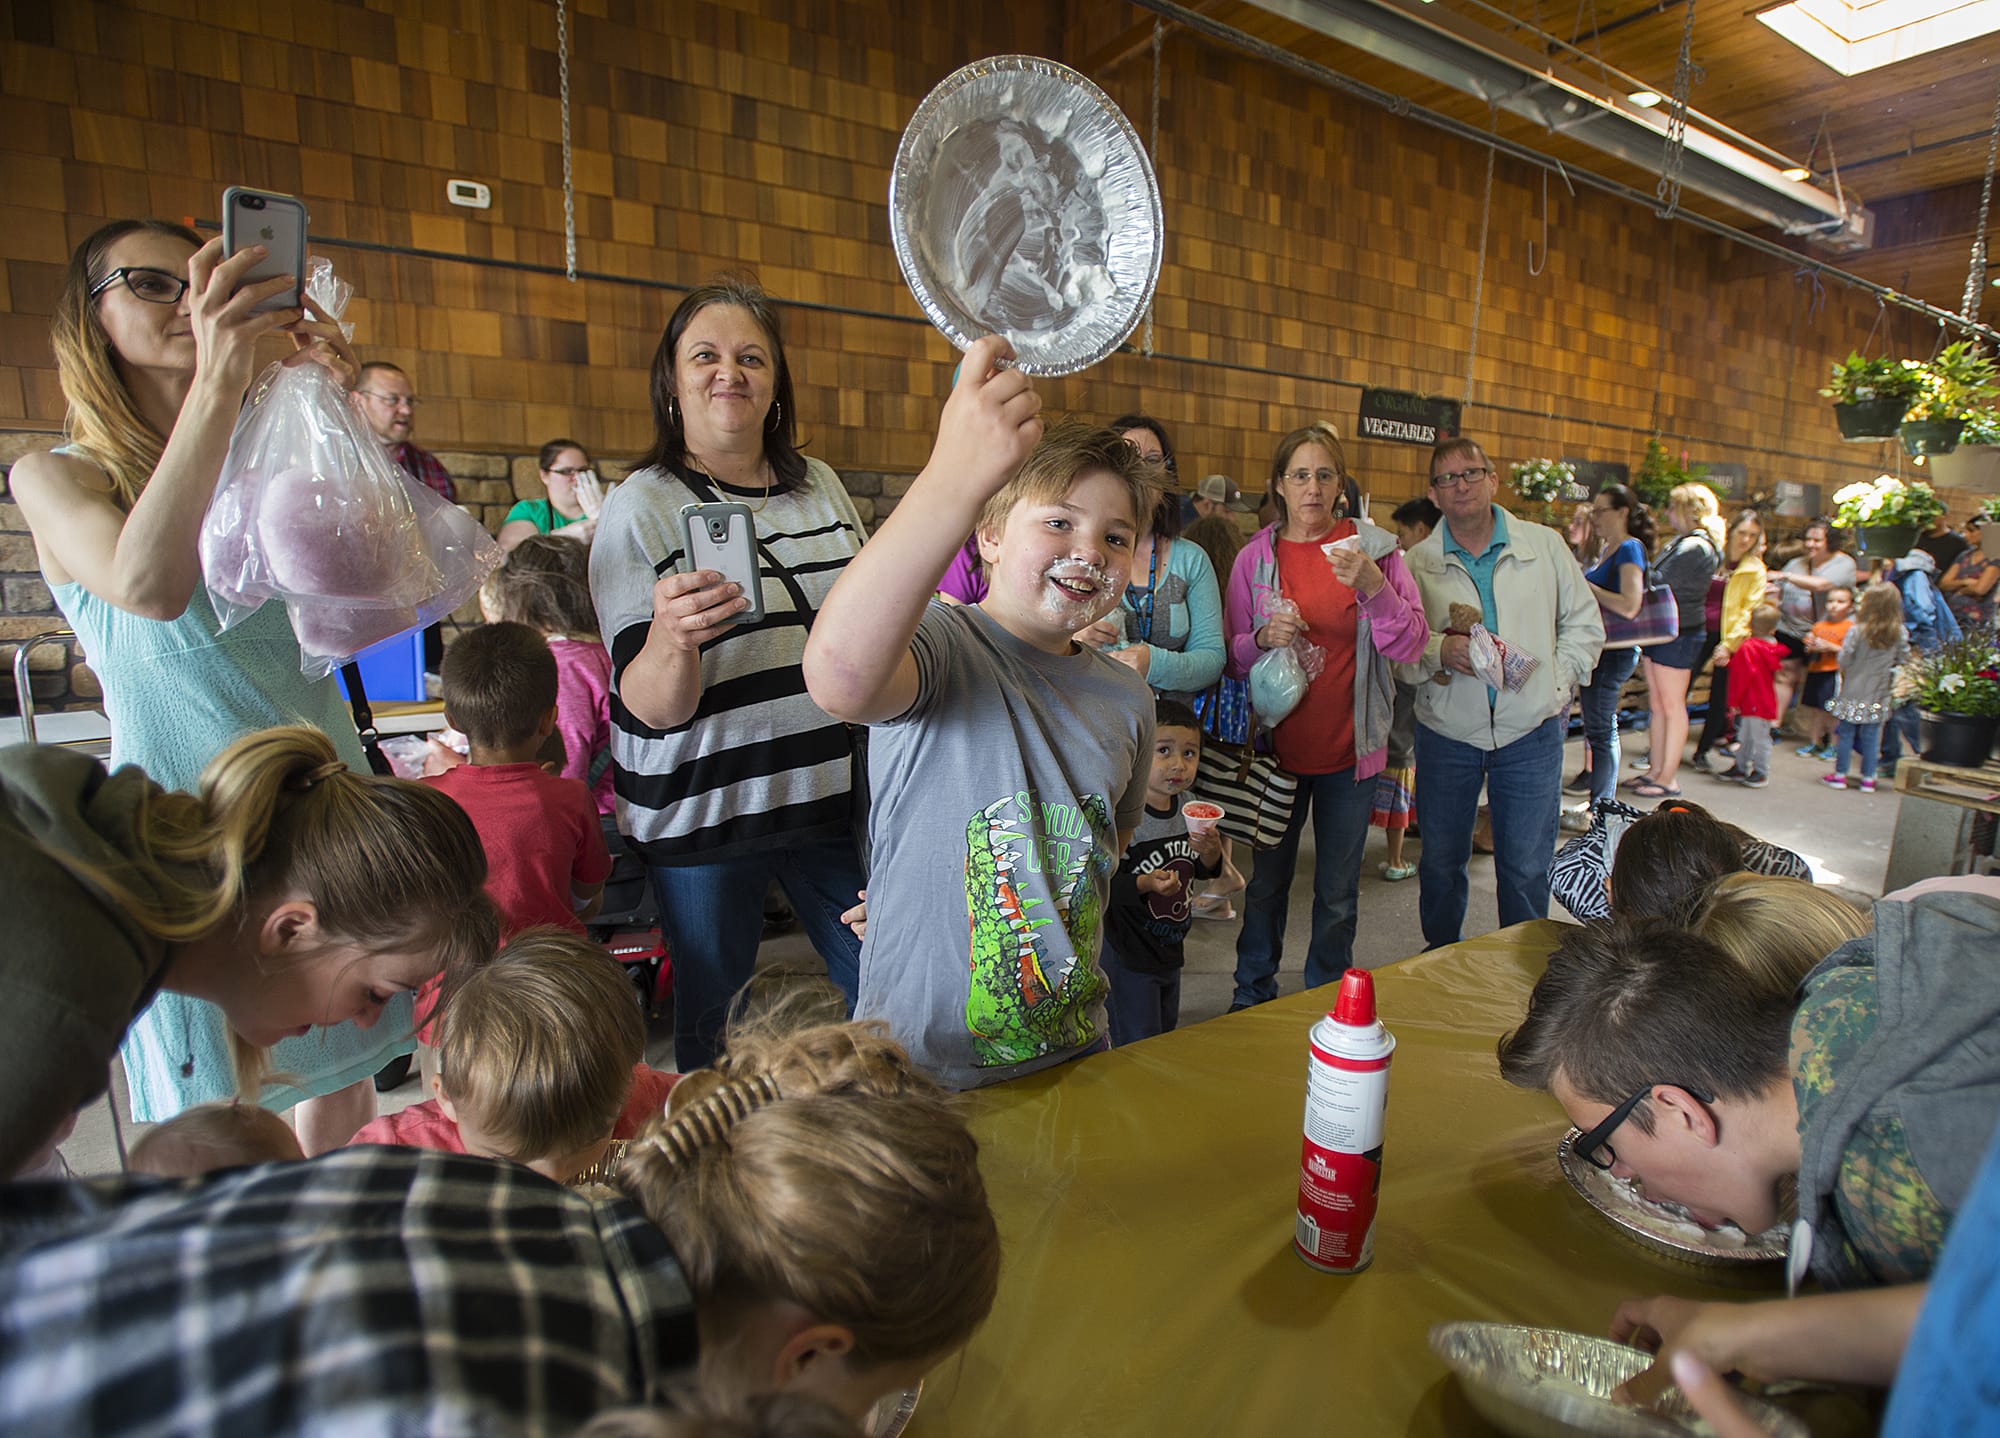 Camas resident Ryder Smith, 10, is all smiles as he wins a round of the whipped cream pie eating content during Chuck's Carnival Kid's Day at Chuck's Produce in Southeast Vancouver on Monday afternoon, June 25, 2018. The event, which was free to the public, featured a variety of games, cotton candy, snow cones, popcorn, a cupcake walk and prizes.